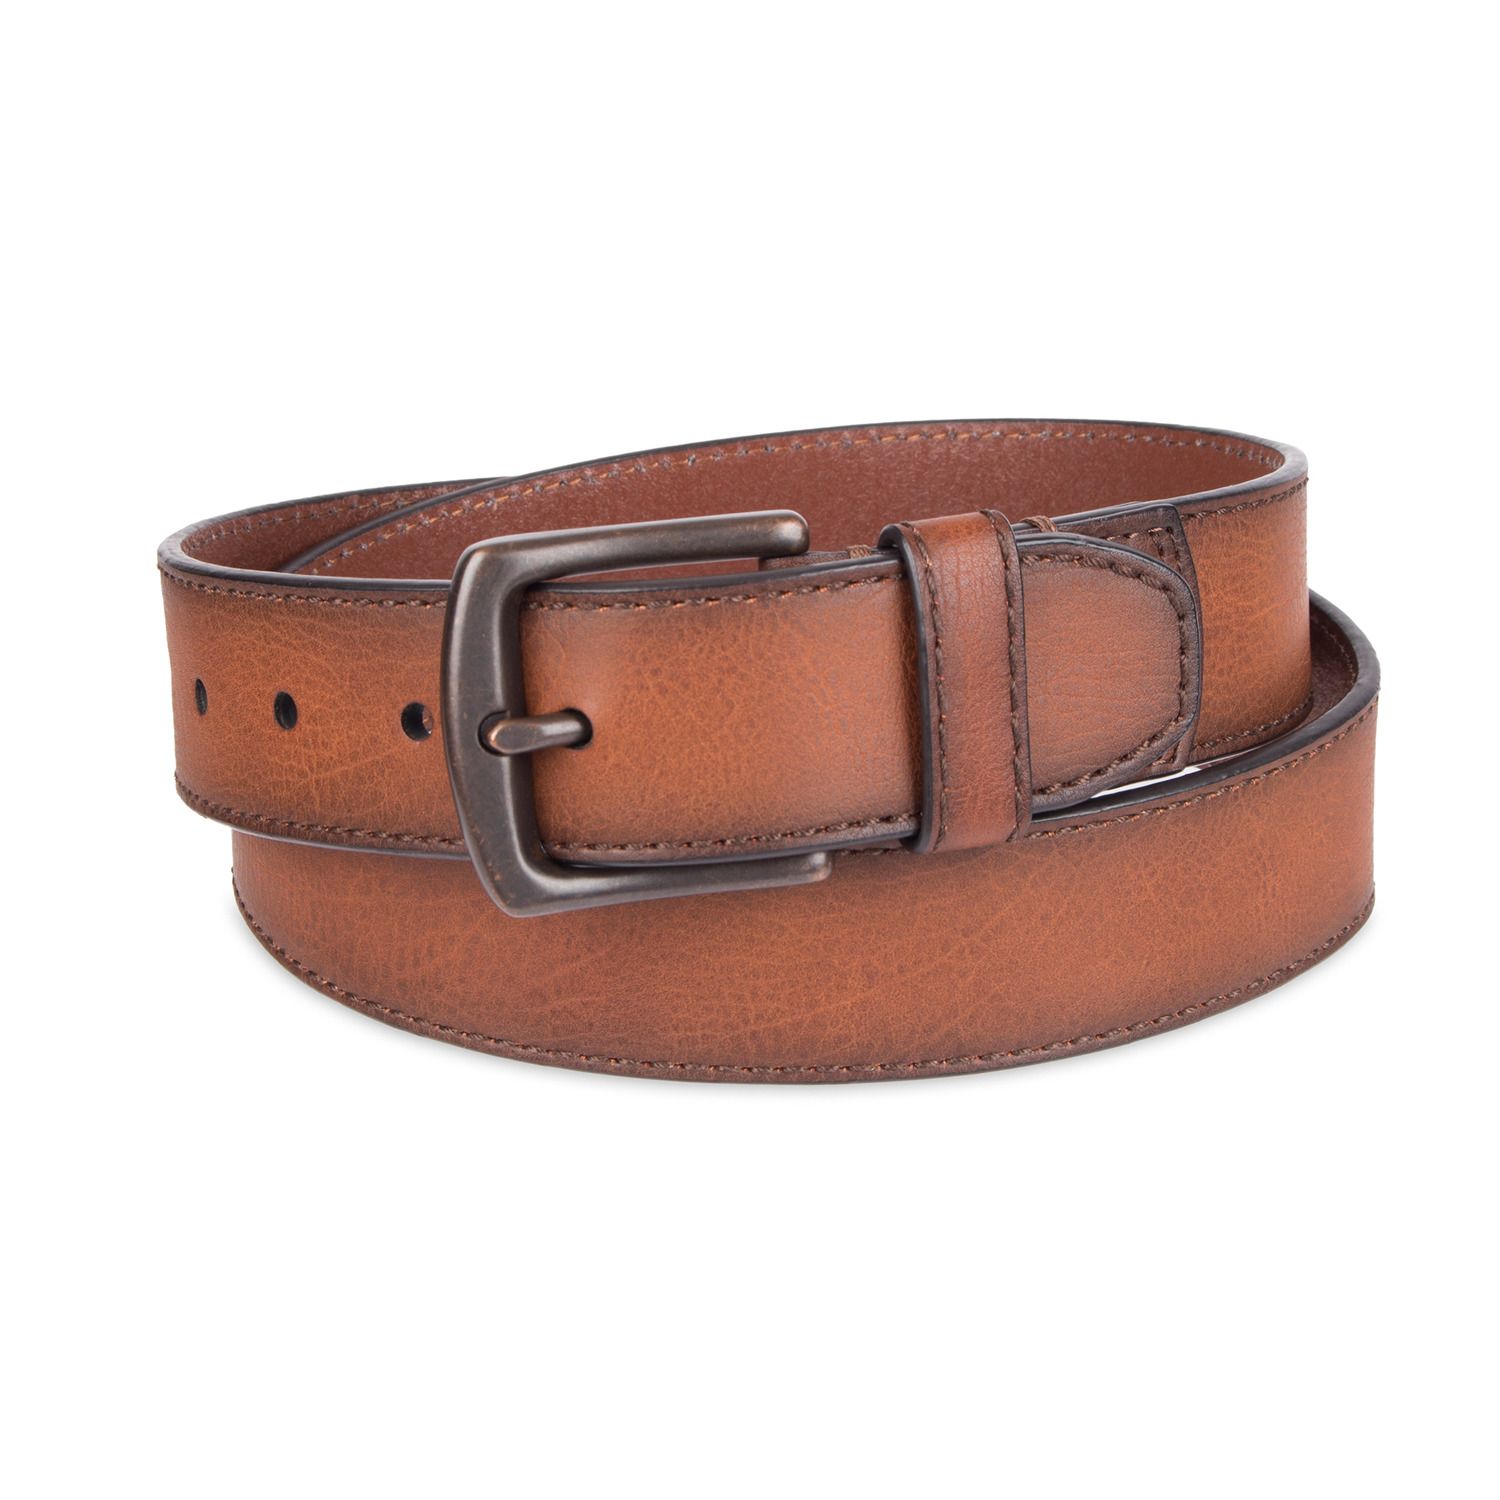 Image for Levi's Men's Casual Brown Belt at Kohl's.